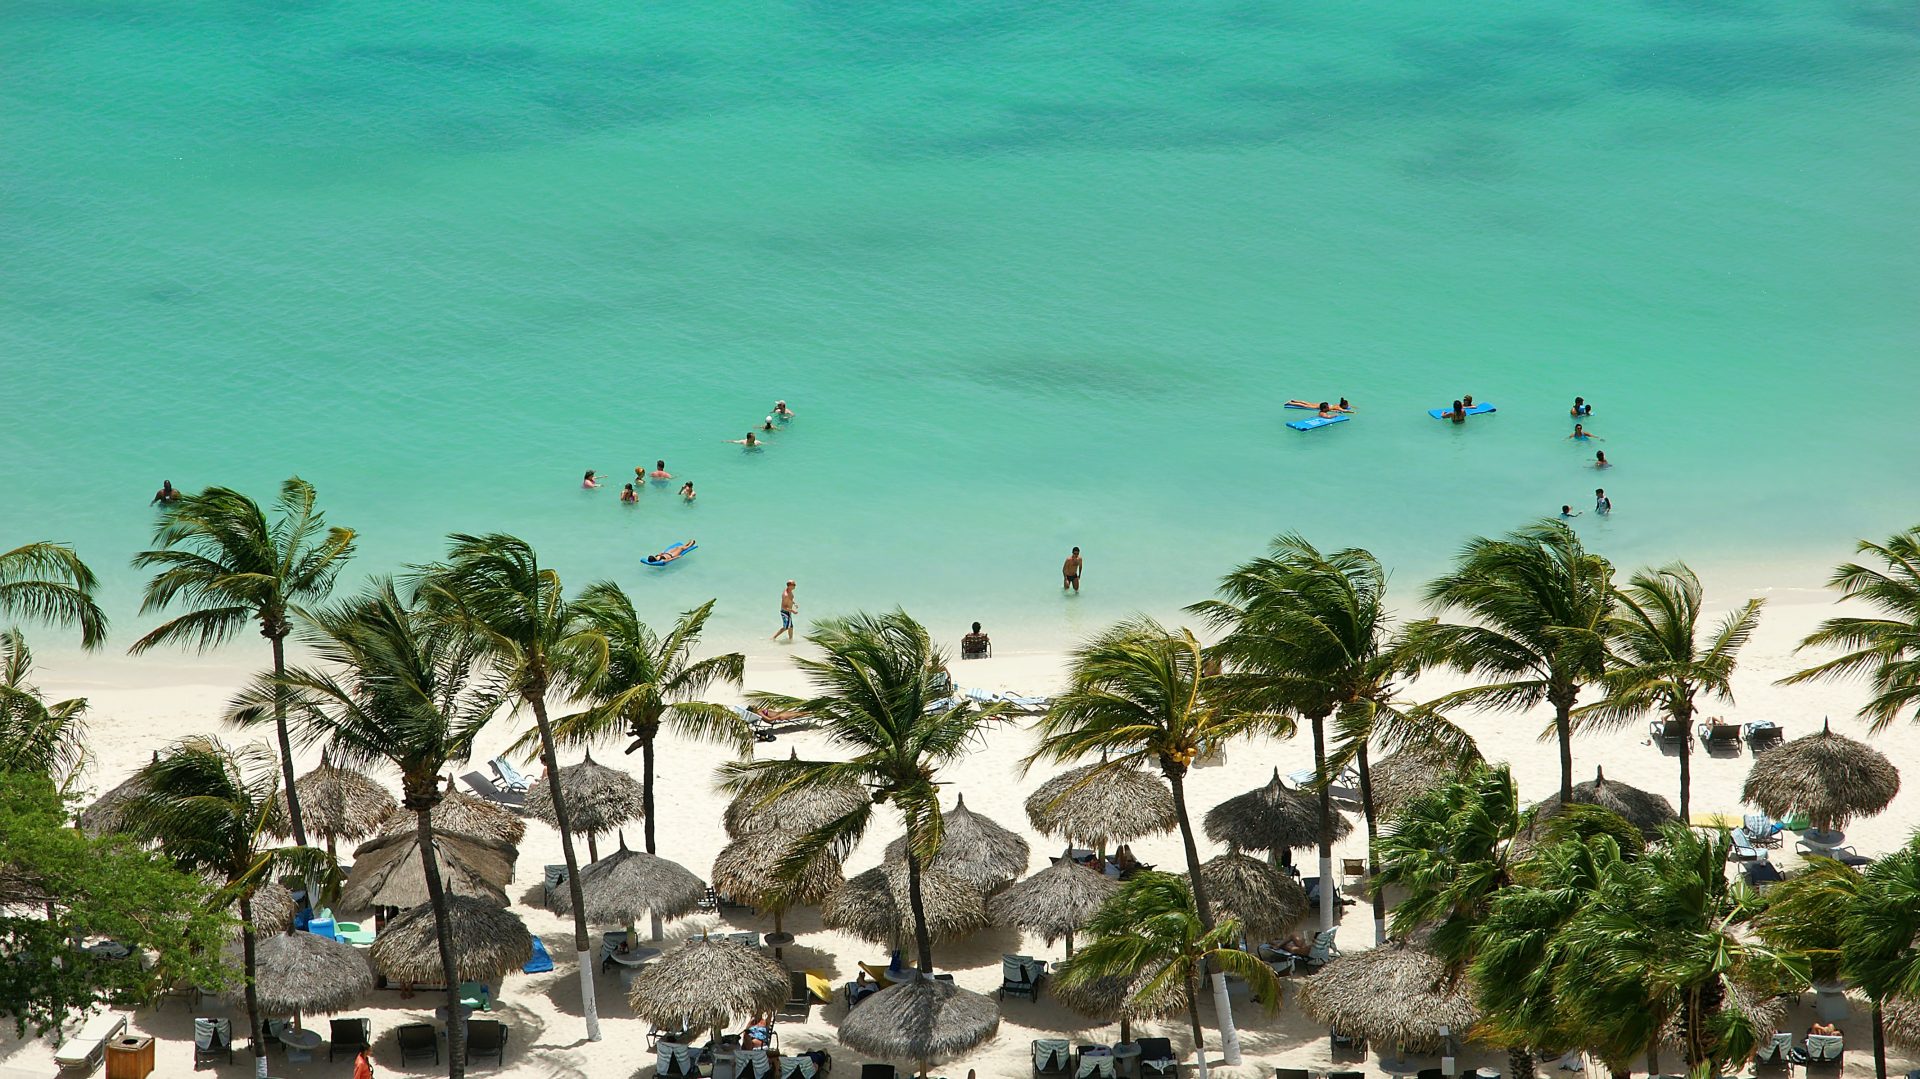 The Best Reasons to Visit Aruba